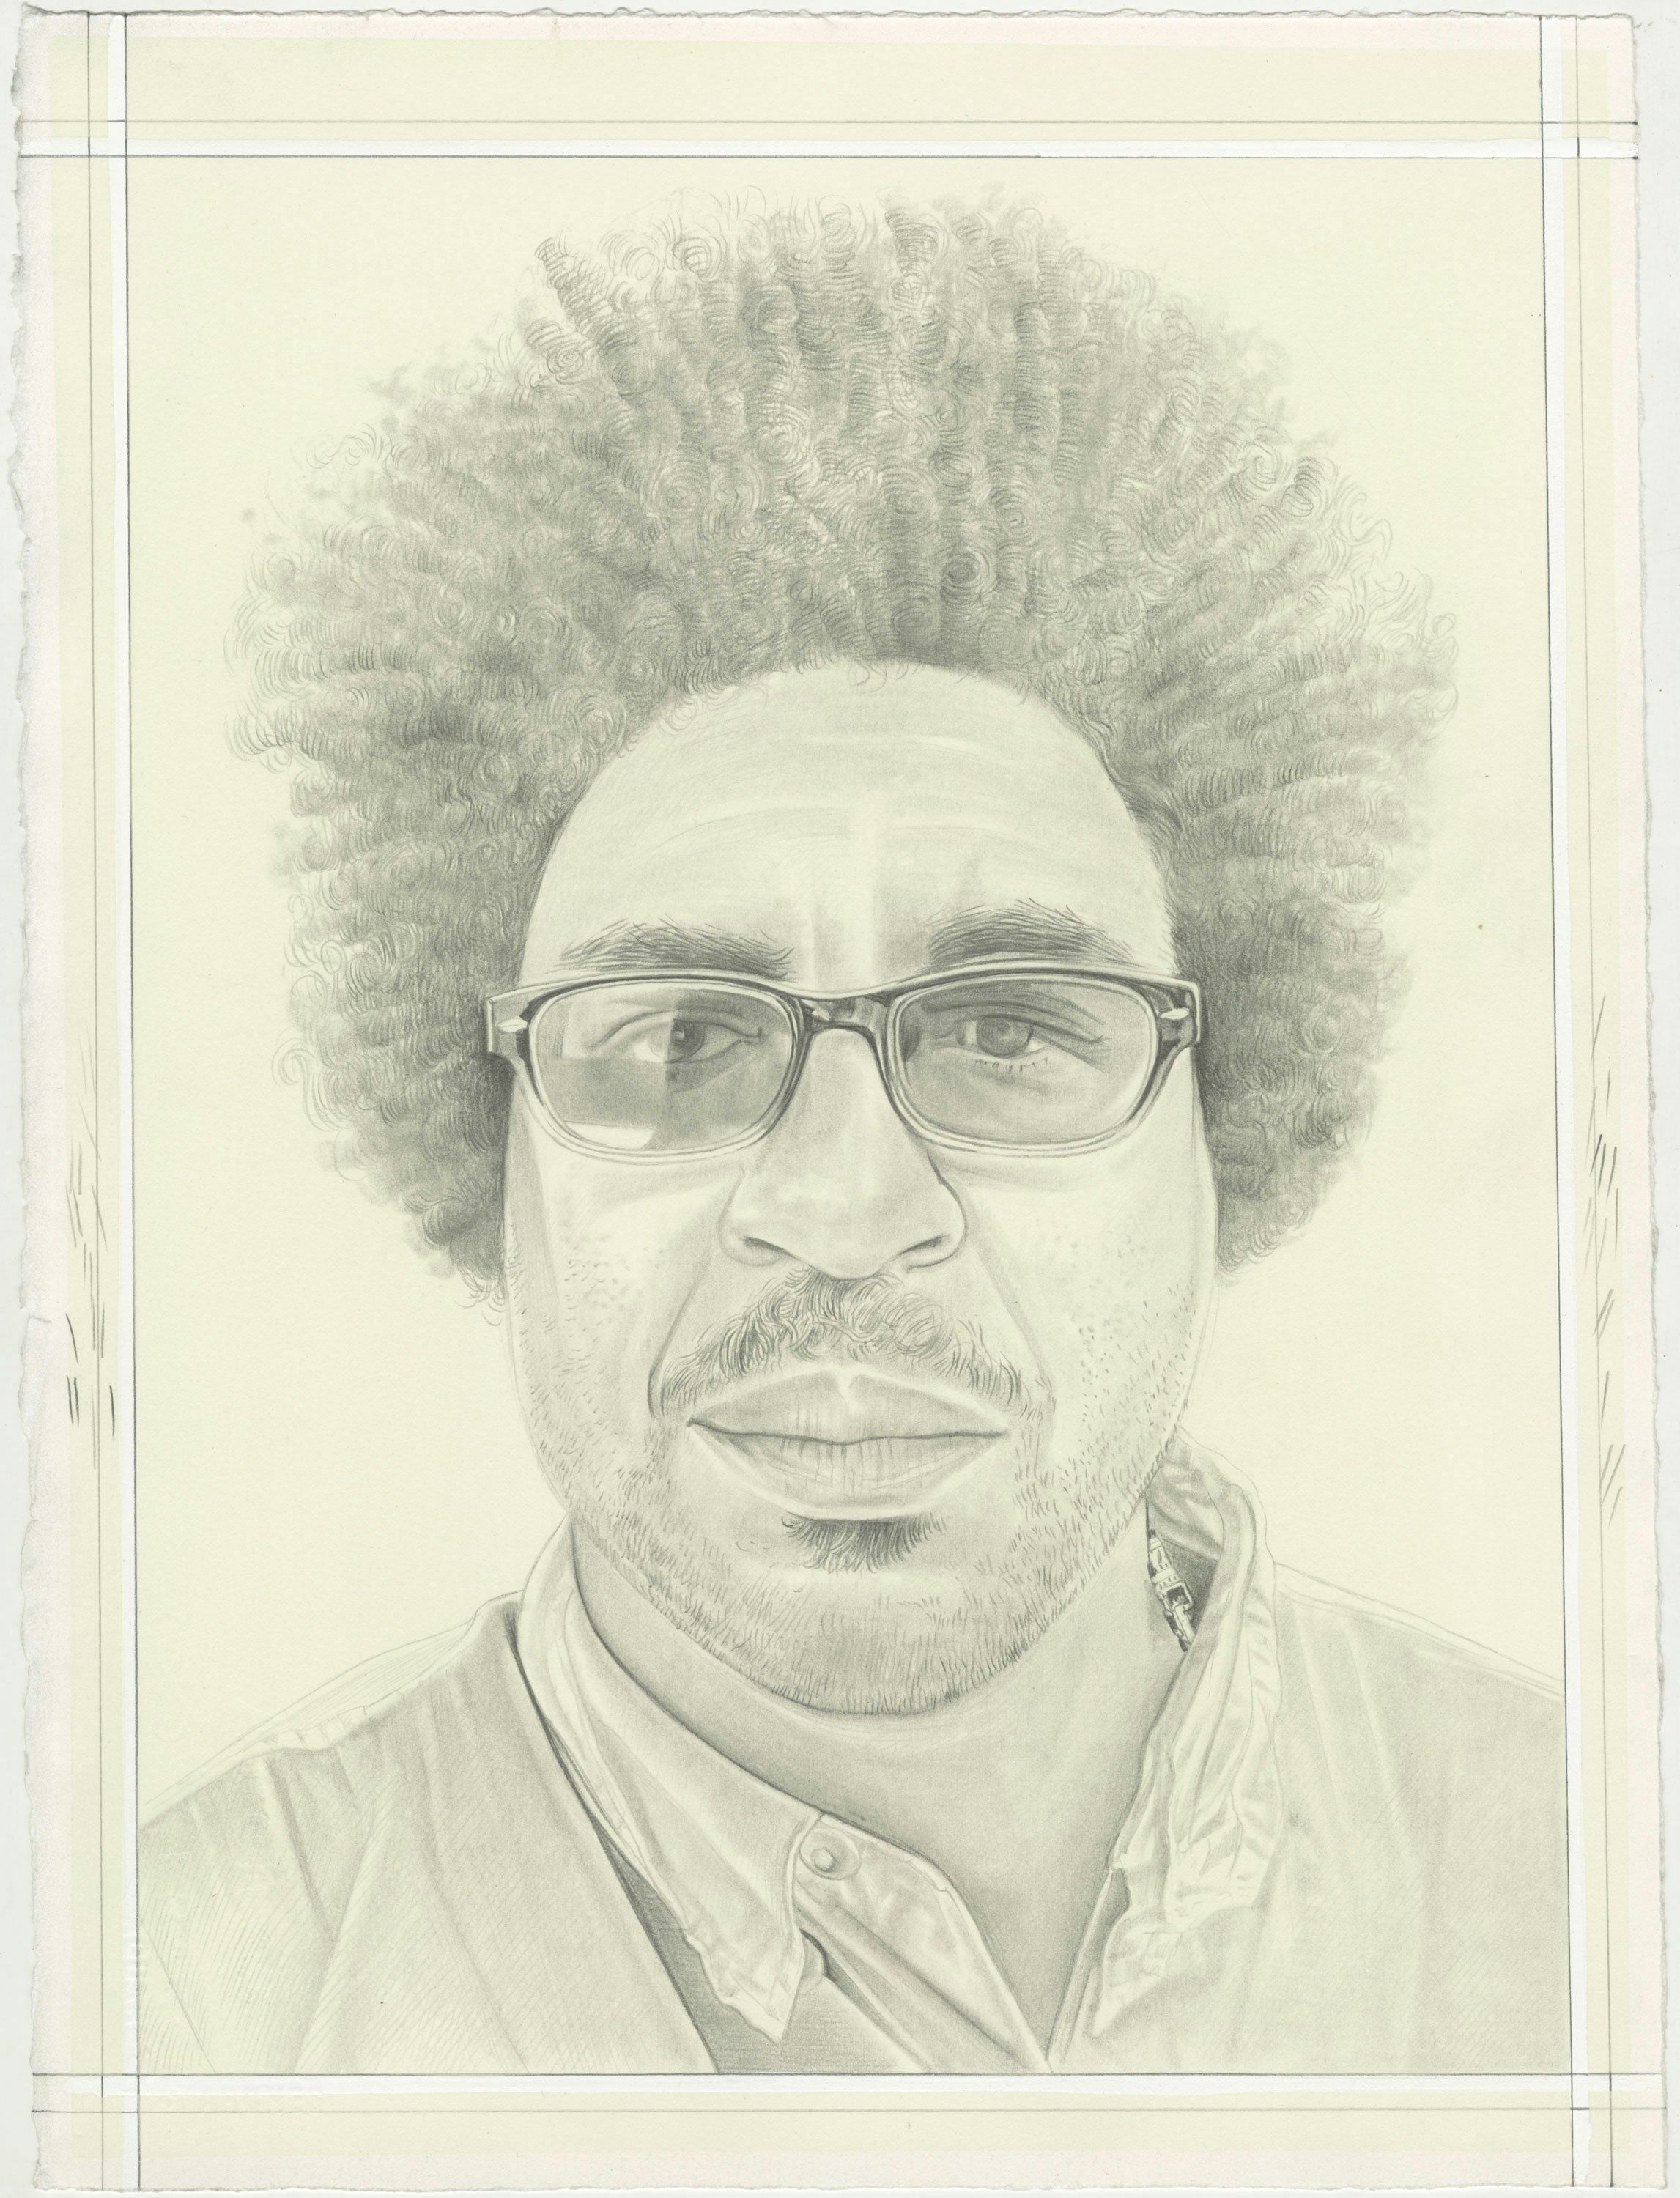 Portrait of John Sims, pencil on paper by Phong H. Bui.